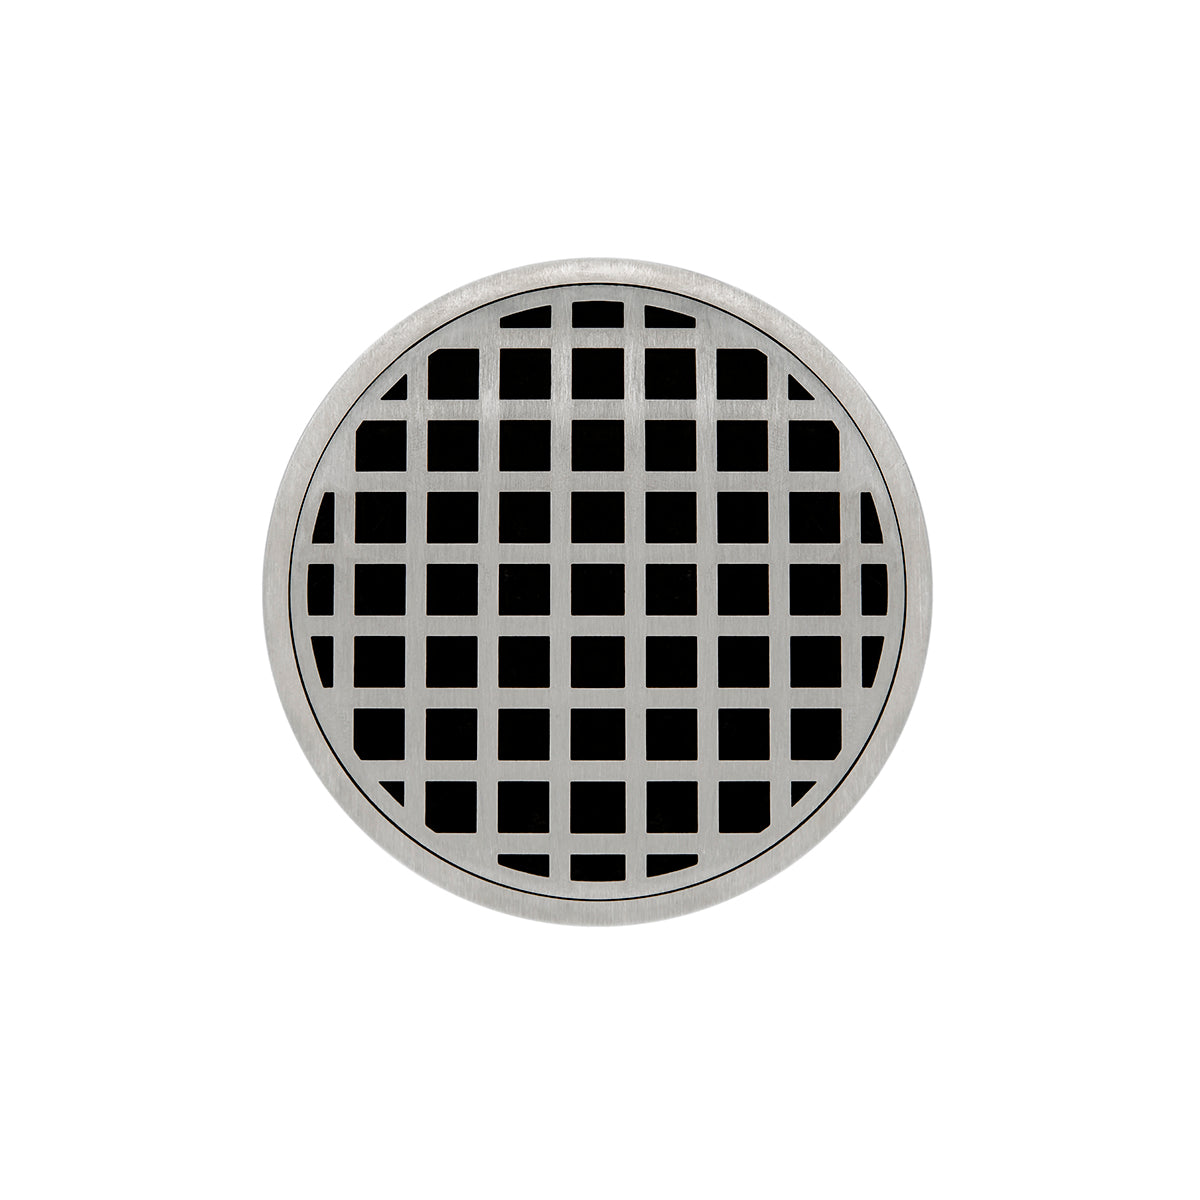 Infinity Drain 5" Round RQD 5 Premium Center Drain Kit with Squares Pattern Decorative Plate with ABS Drain Body, 2" Outlet